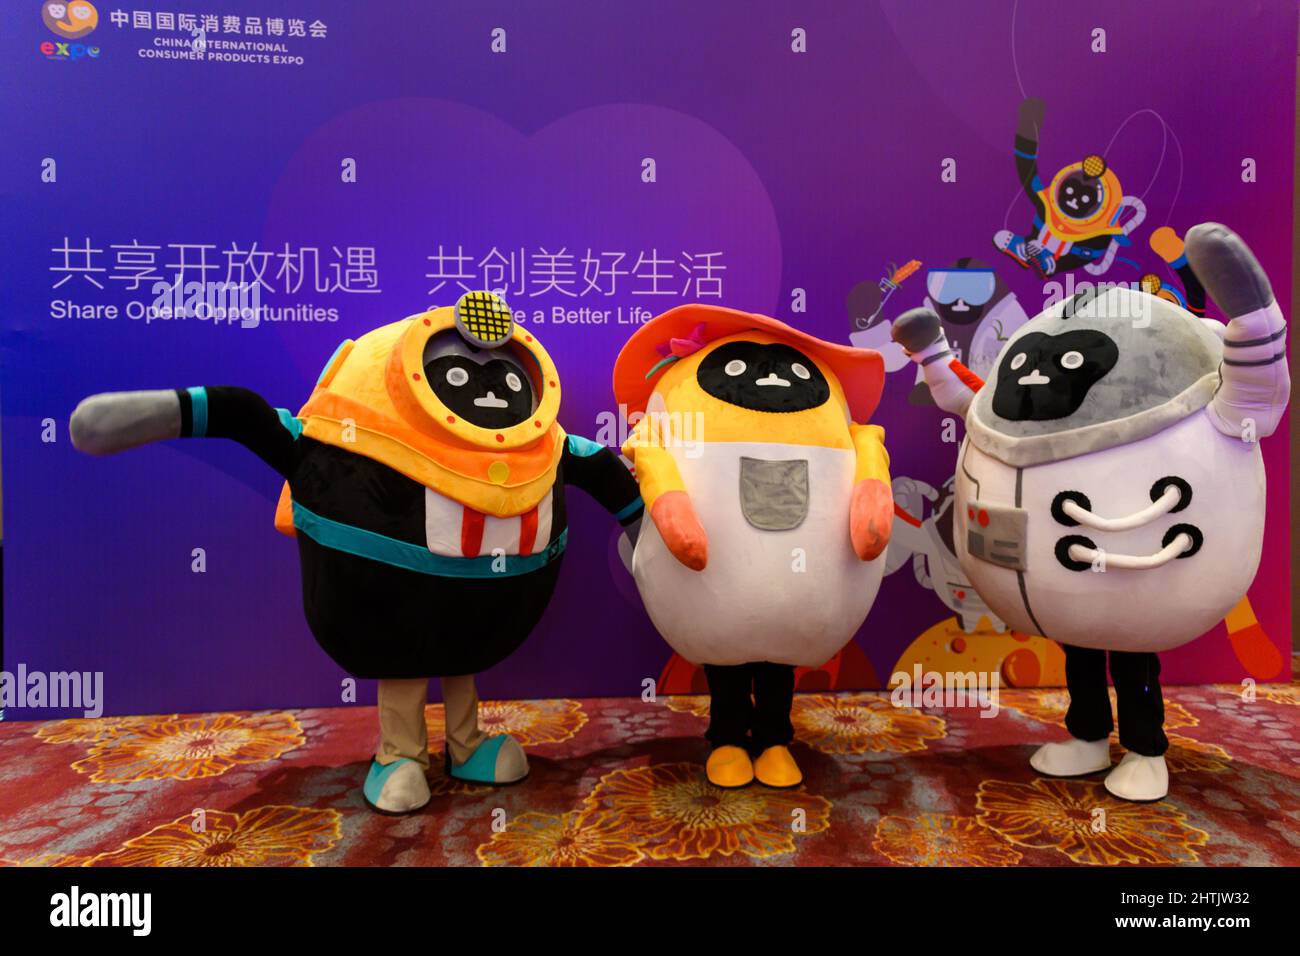 (220301) -- HAIKOU, March 1, 2022 (Xinhua) -- Photo taken on March 1, 2022 shows the mascots for the 2022 China International Consumer Products Expo, styled after the Hainan gibbon, in Haikou, south China's Hainan Province. Hainan gibbons are the most endangered of all gibbons and the world's rarest primate. They are endemic to the southern Chinese island of Hainan. The mascots reflect the green consumption approach of the expo, according to Ruslan Tulenov, a global media officer at the Hainan Provincial Bureau of International Economic Development. The mascots embody the three dominant and Stock Photo